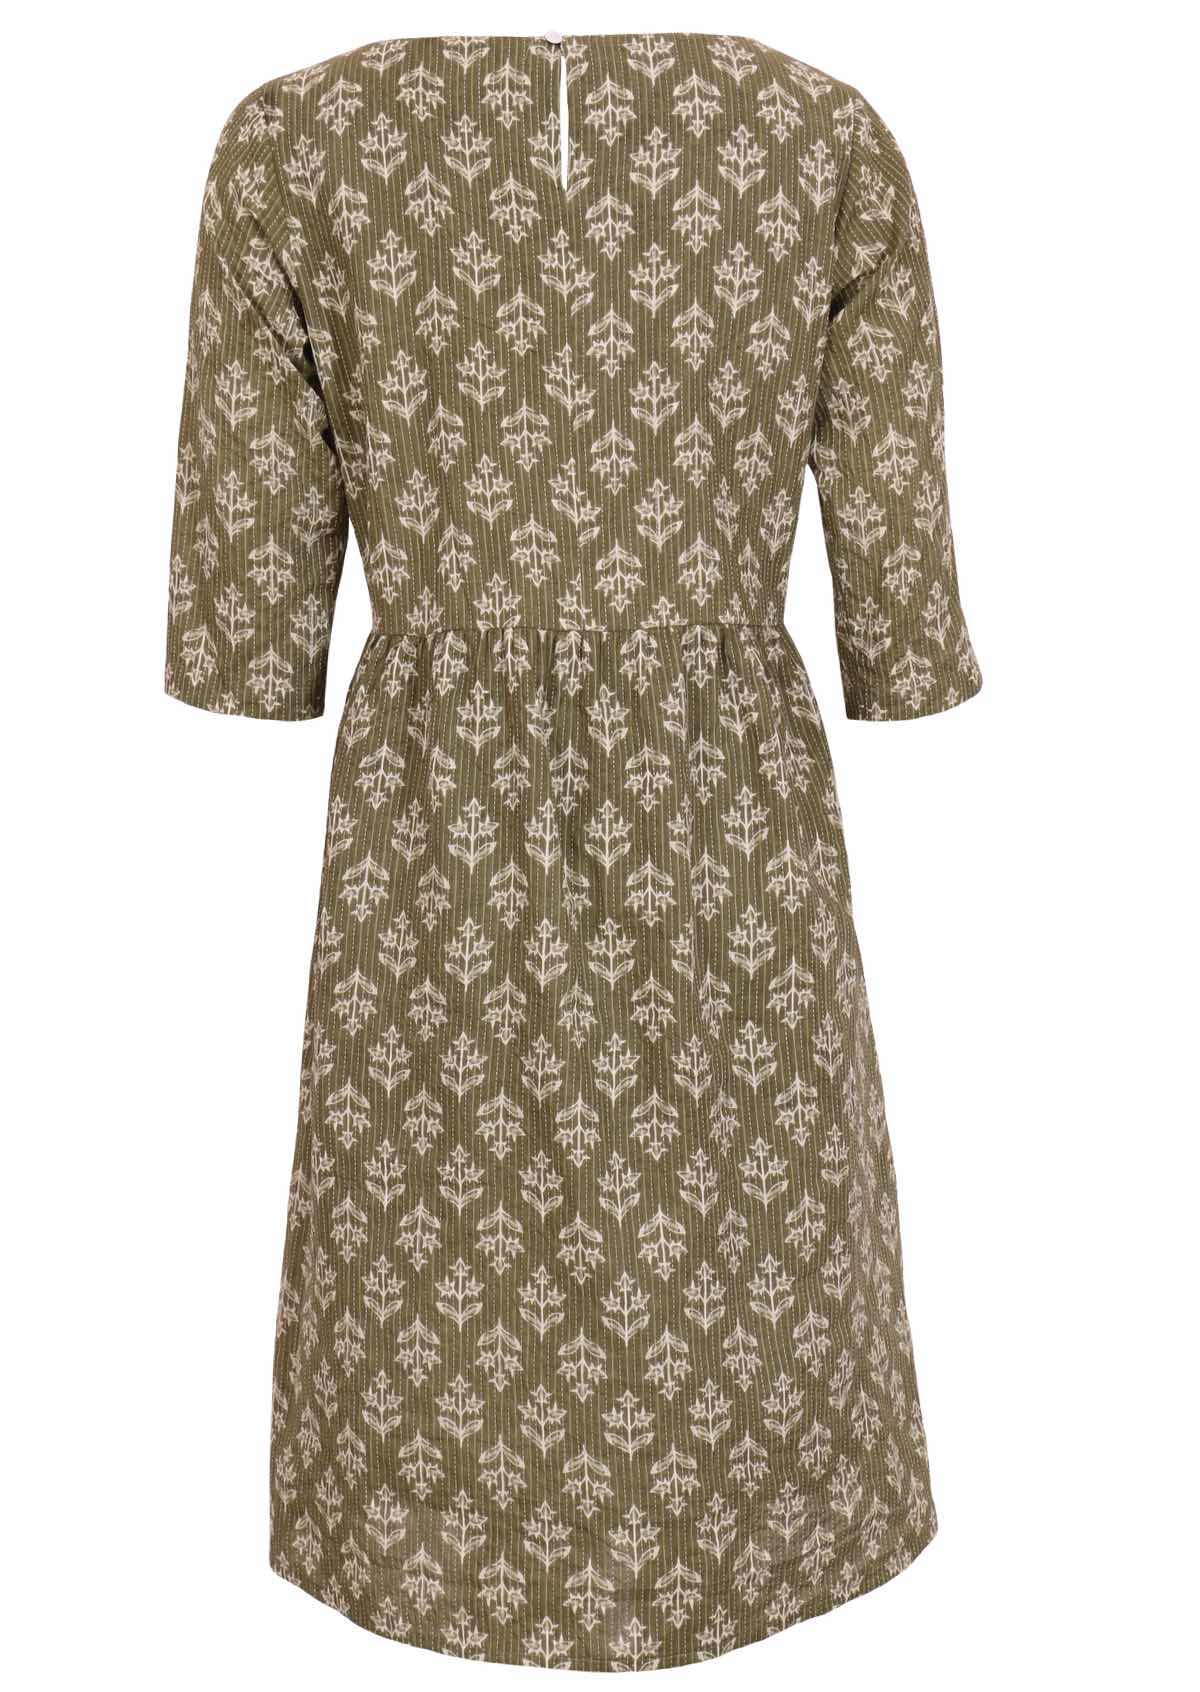 Cotton dress in sweet green has button closure at nape of neck to ease with dressing